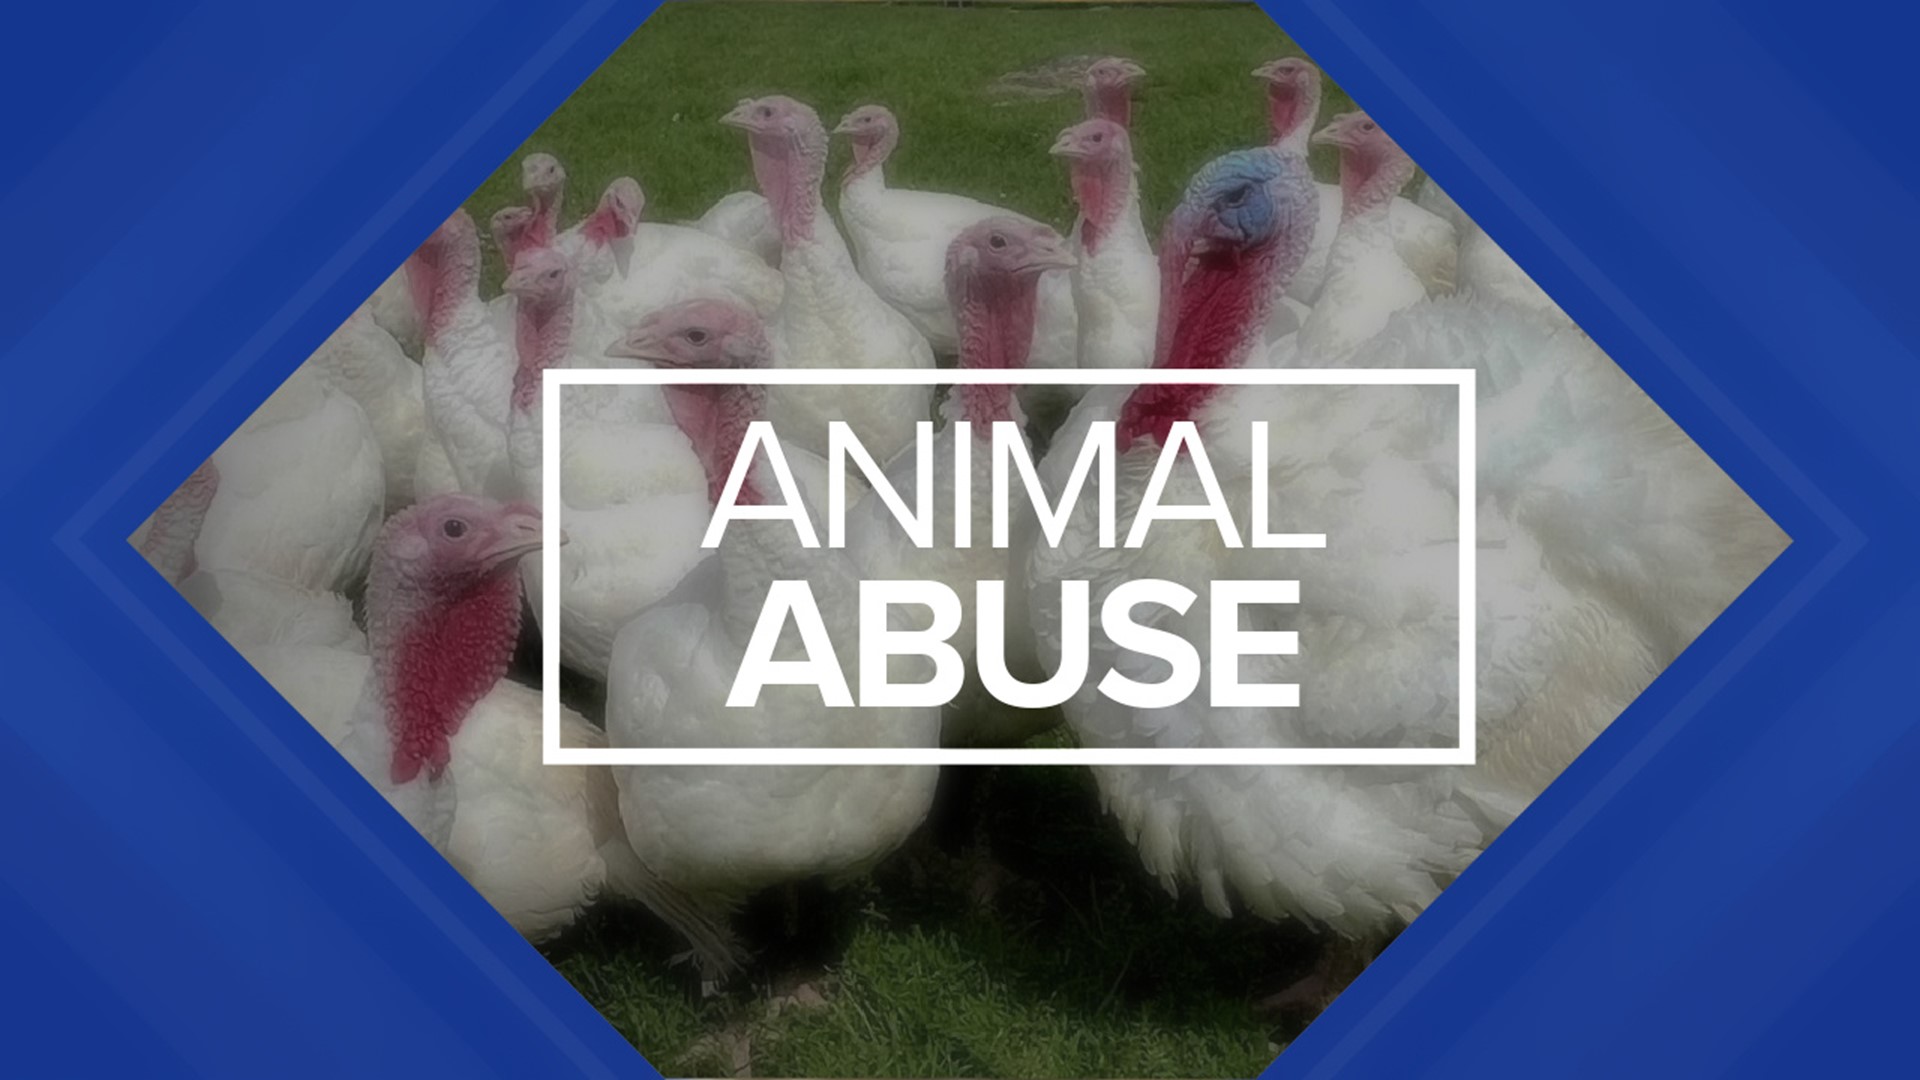 Troopers say workers at seven Plainville Farms locations used cruel methods when capturing turkeys for food processing. One farm is in Union County.